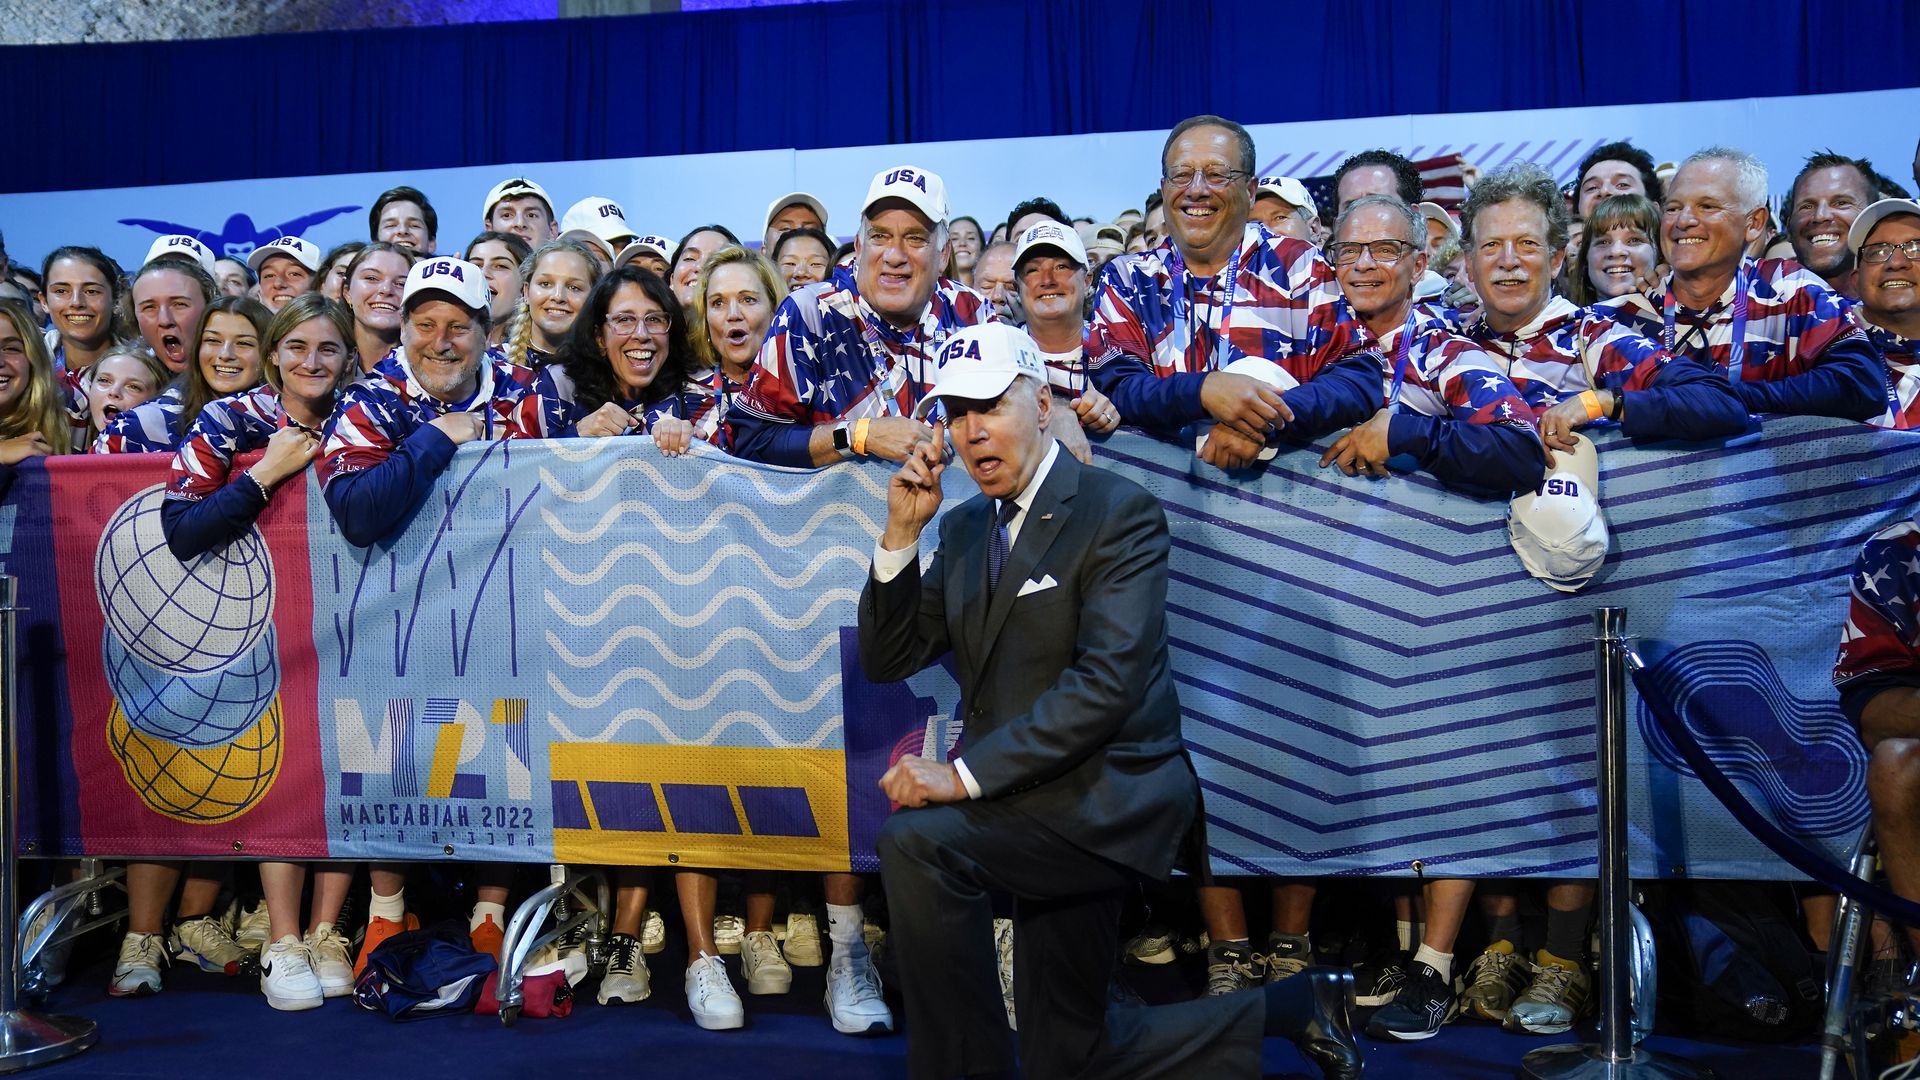 Biden with fans at Maccabiah Games